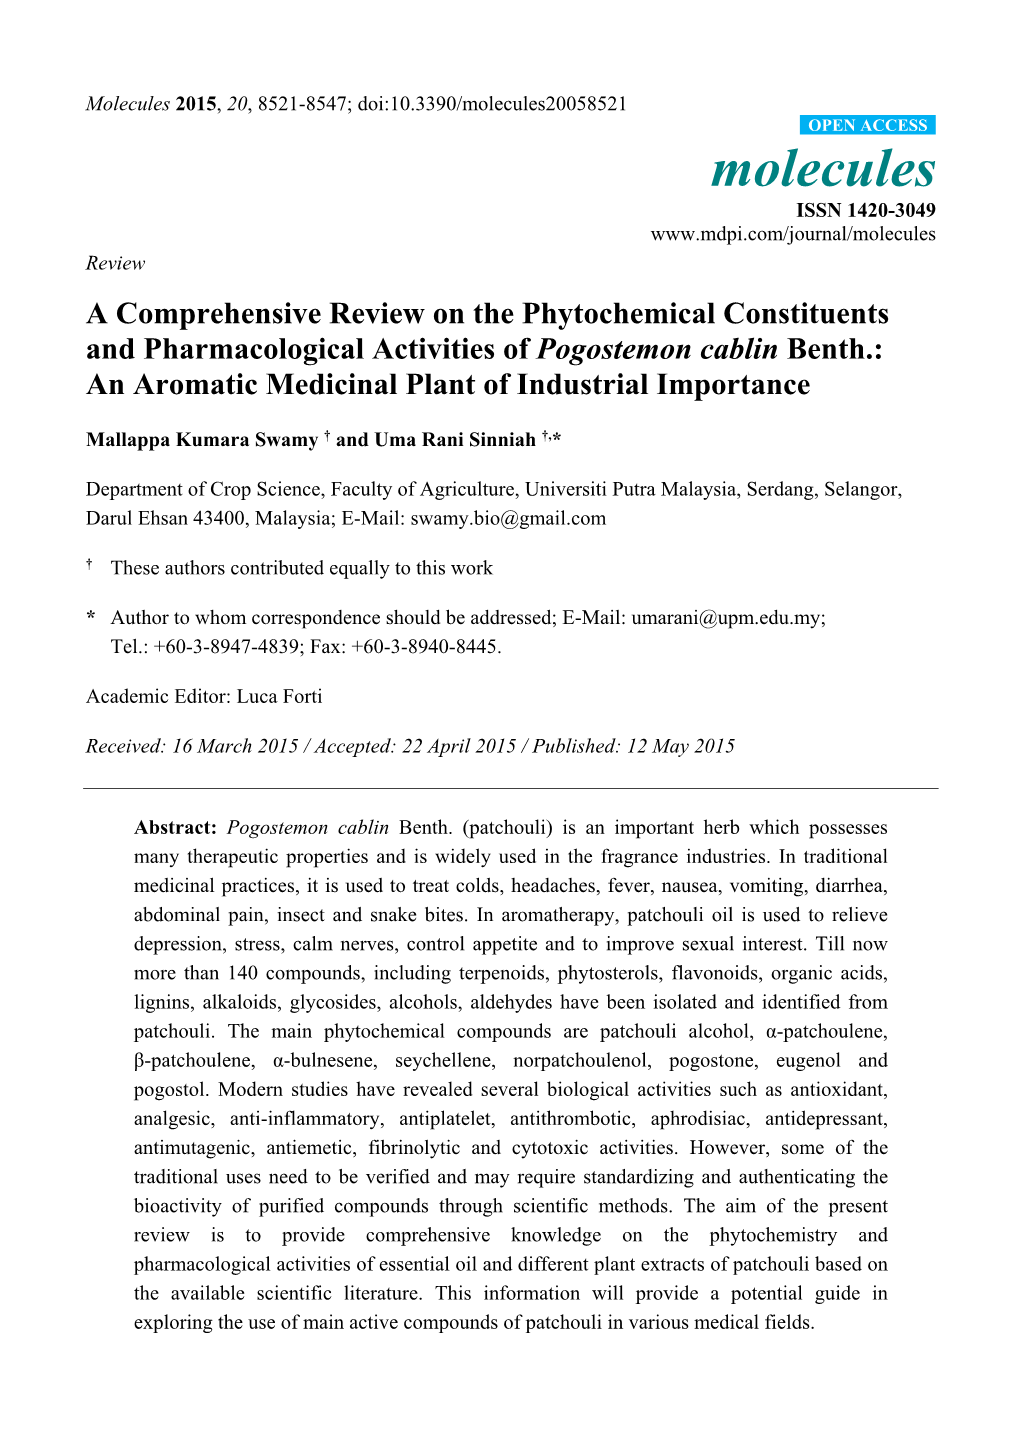 A Comprehensive Review on the Phytochemical Constituents And